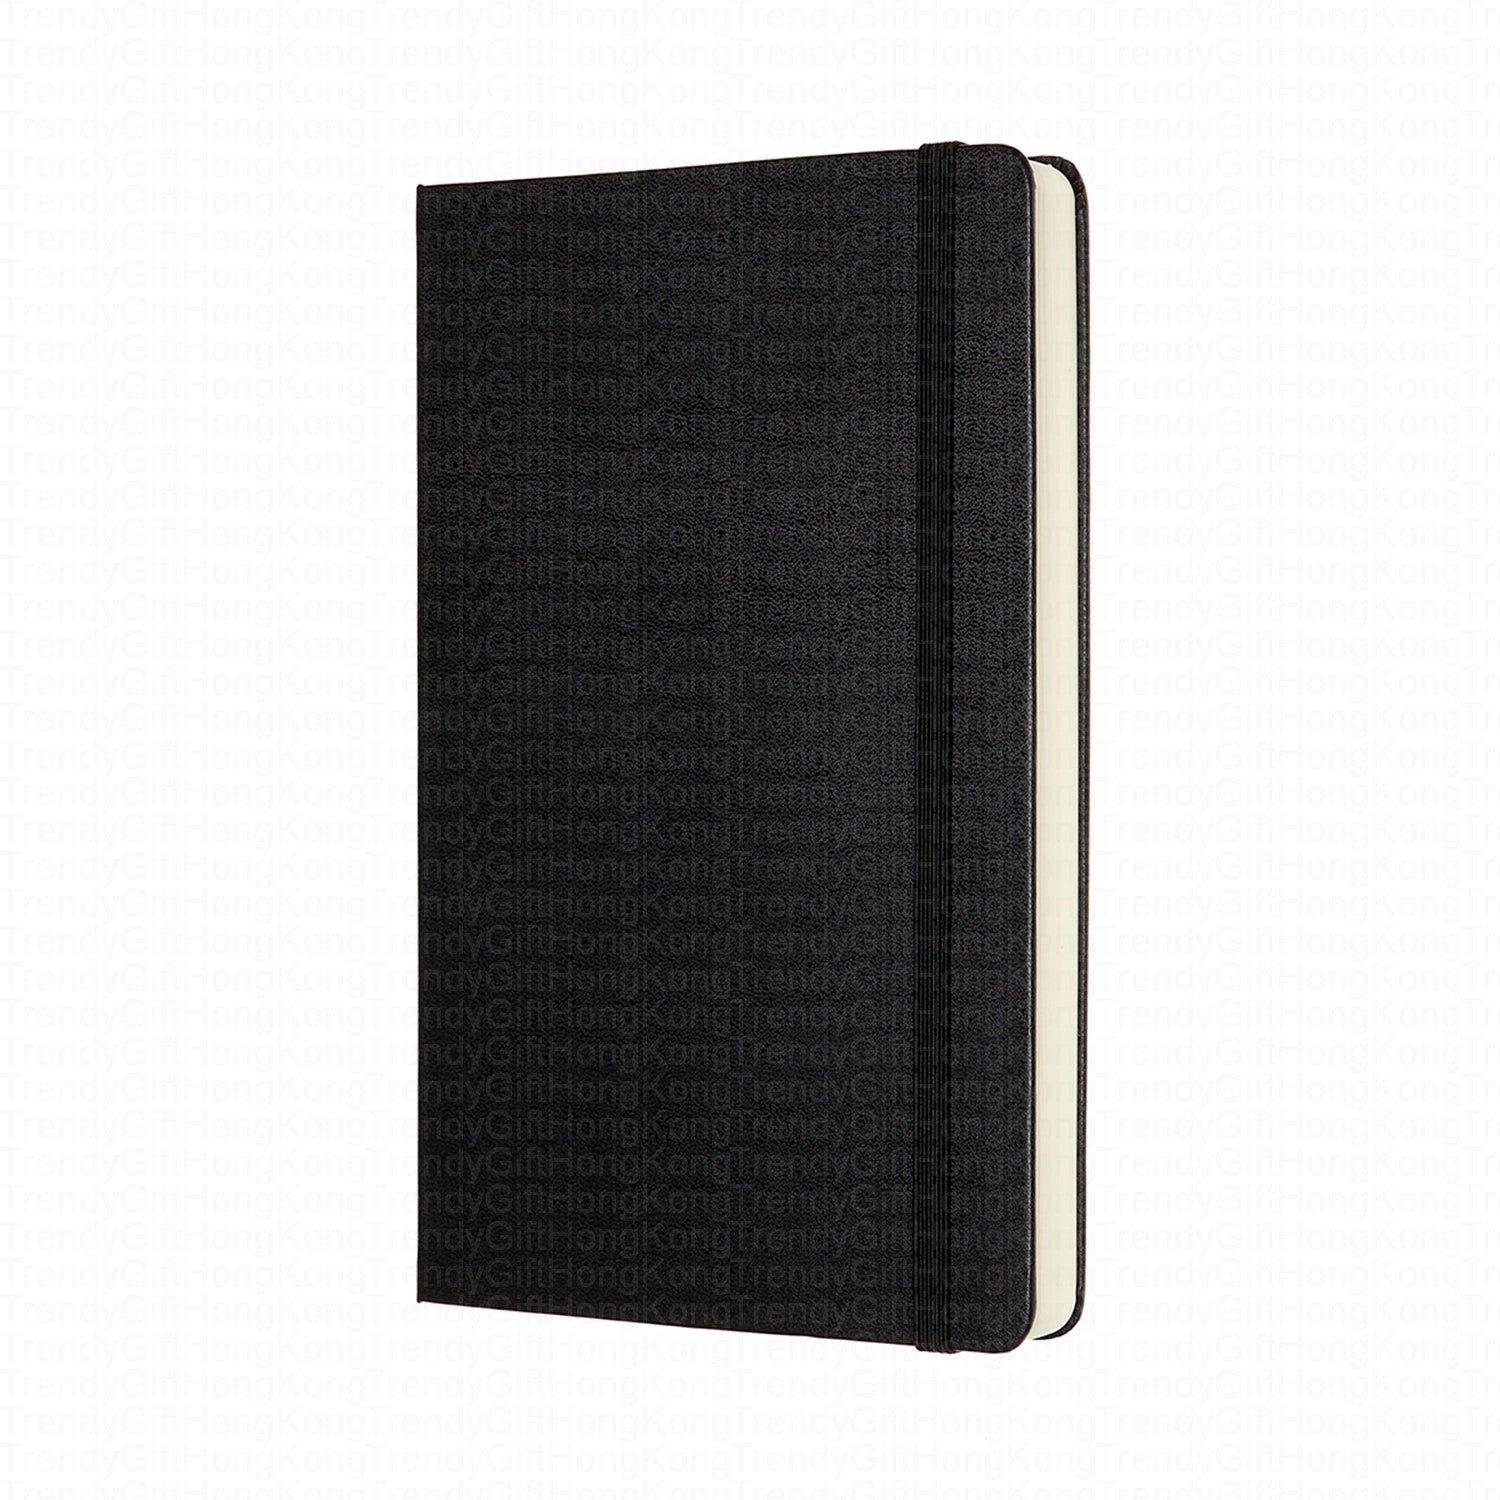 Moleskine Expanded Large Hardcover Notebook - Ruled - 400 Pages - 13 x 21 CM trendygifthk